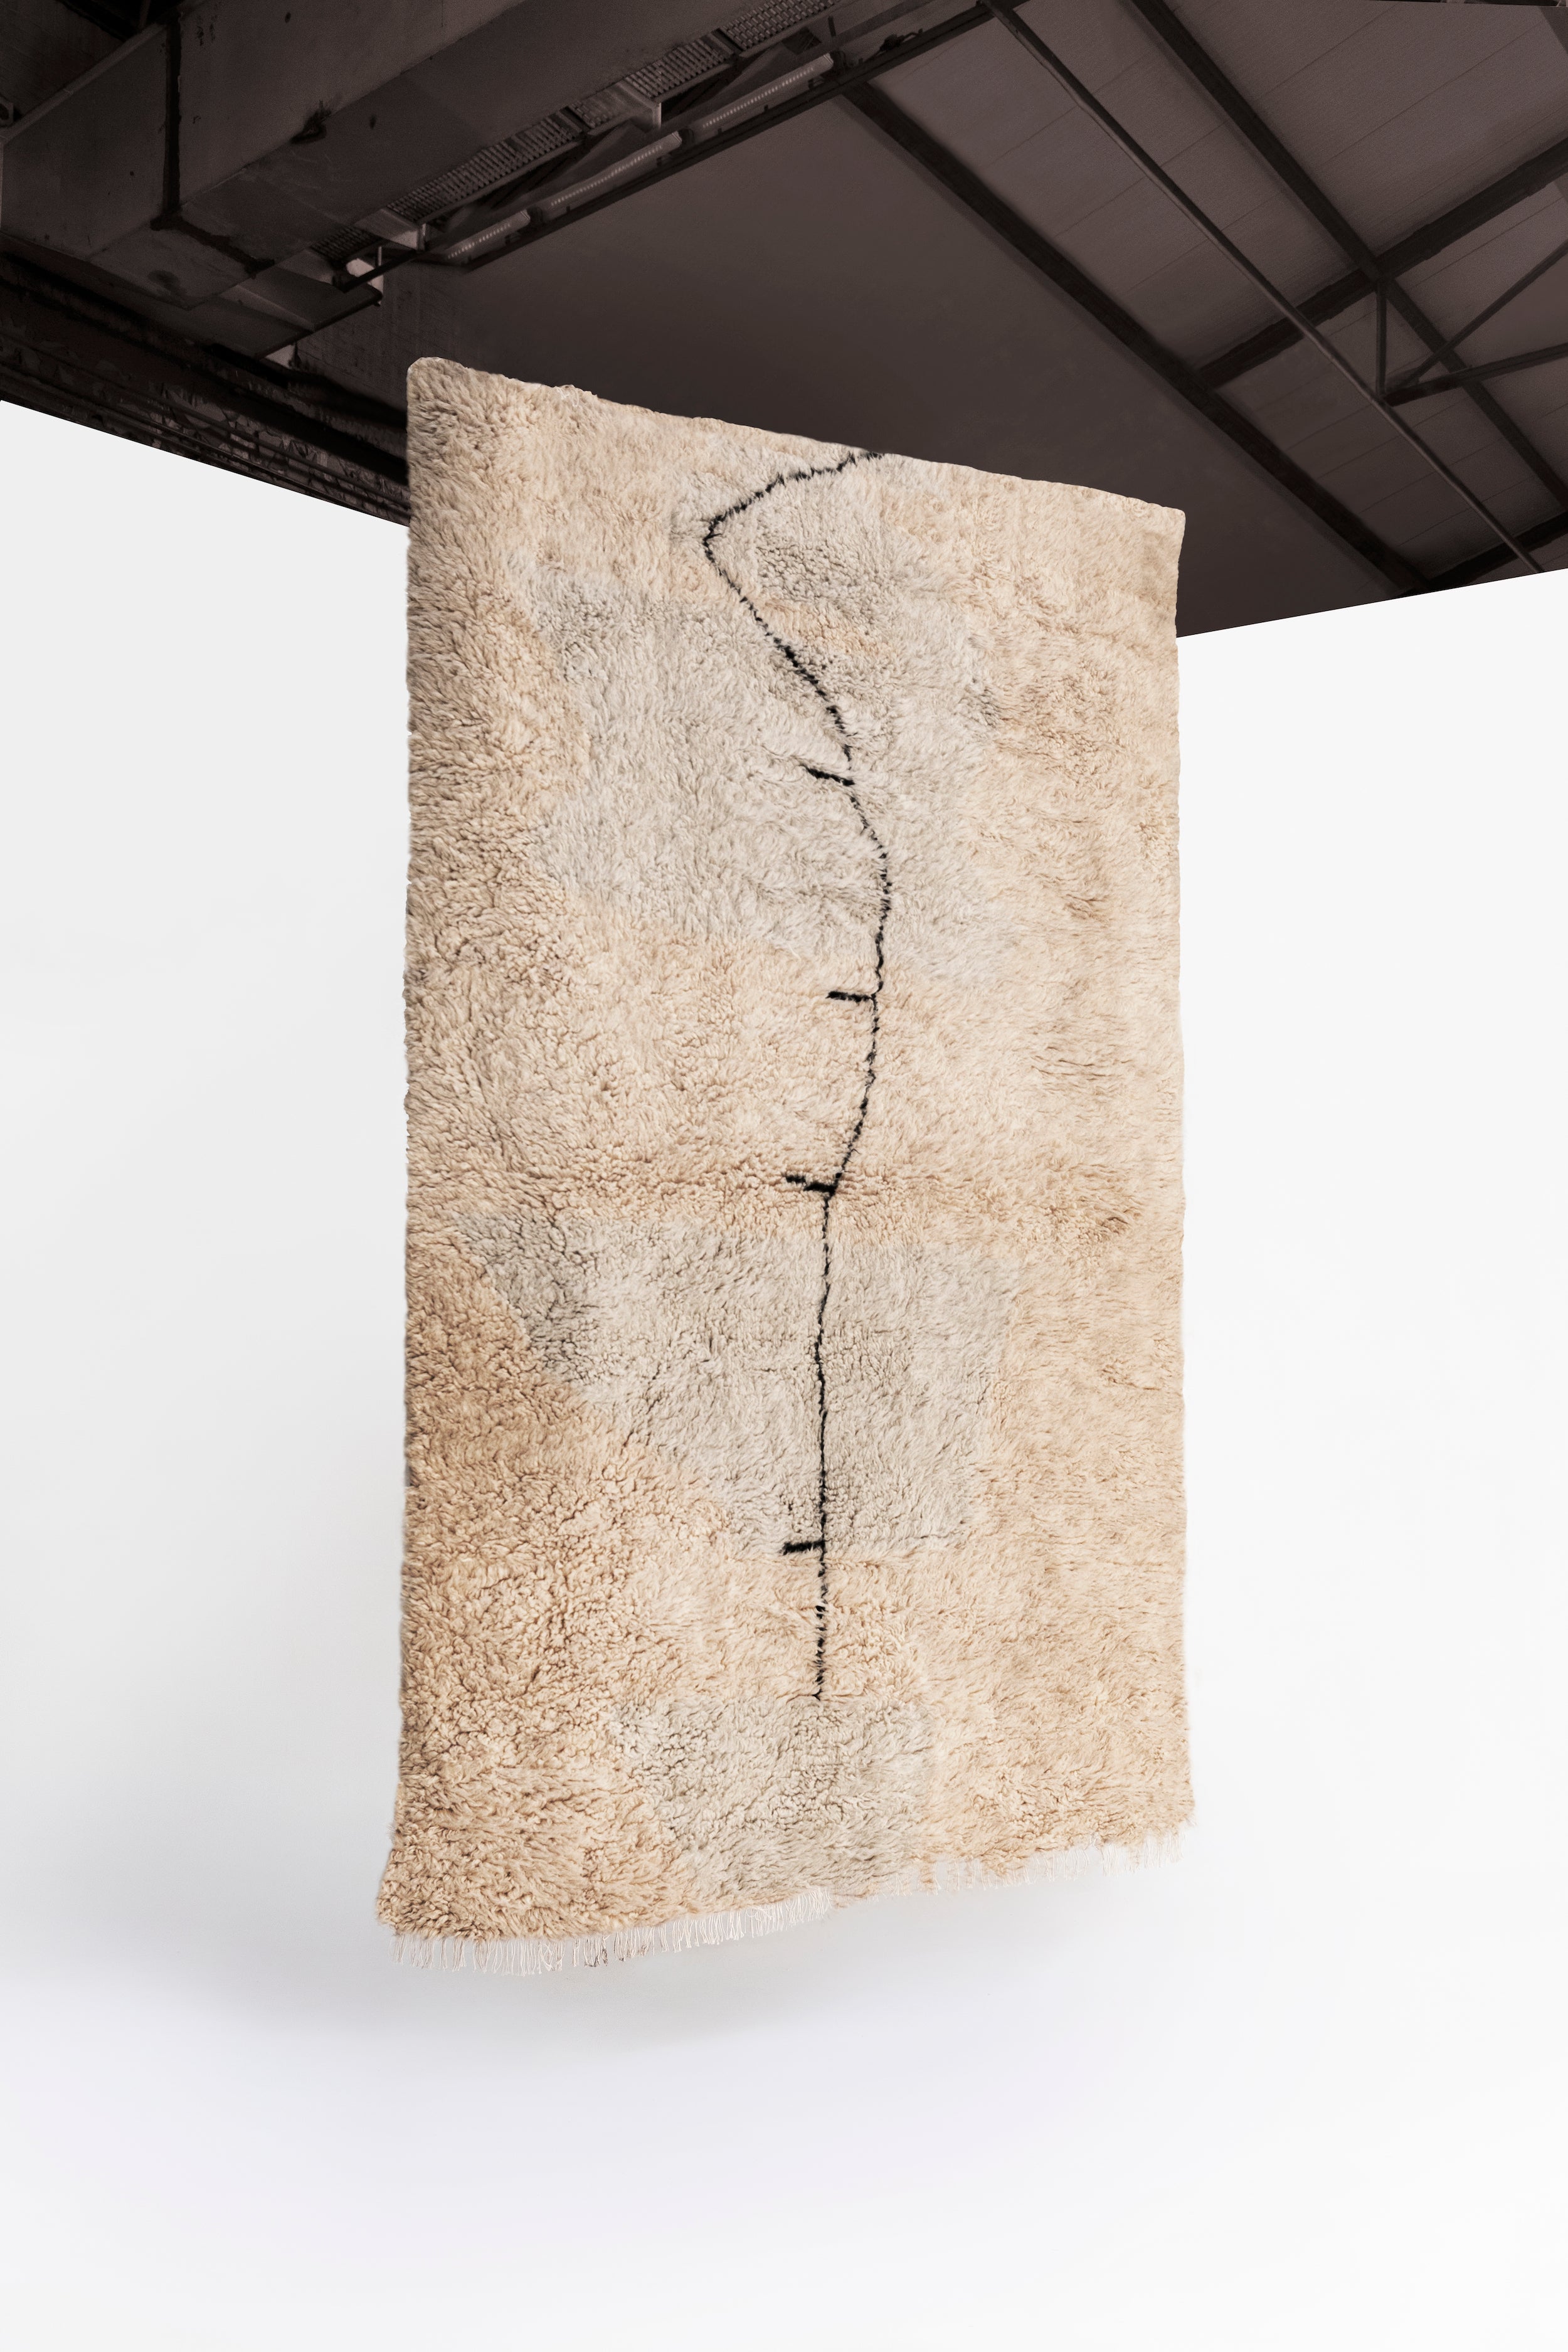 Calvin Pausania's picture of the E la nave va rug, our sustainable handmade artist rug made of 100% sheep wool